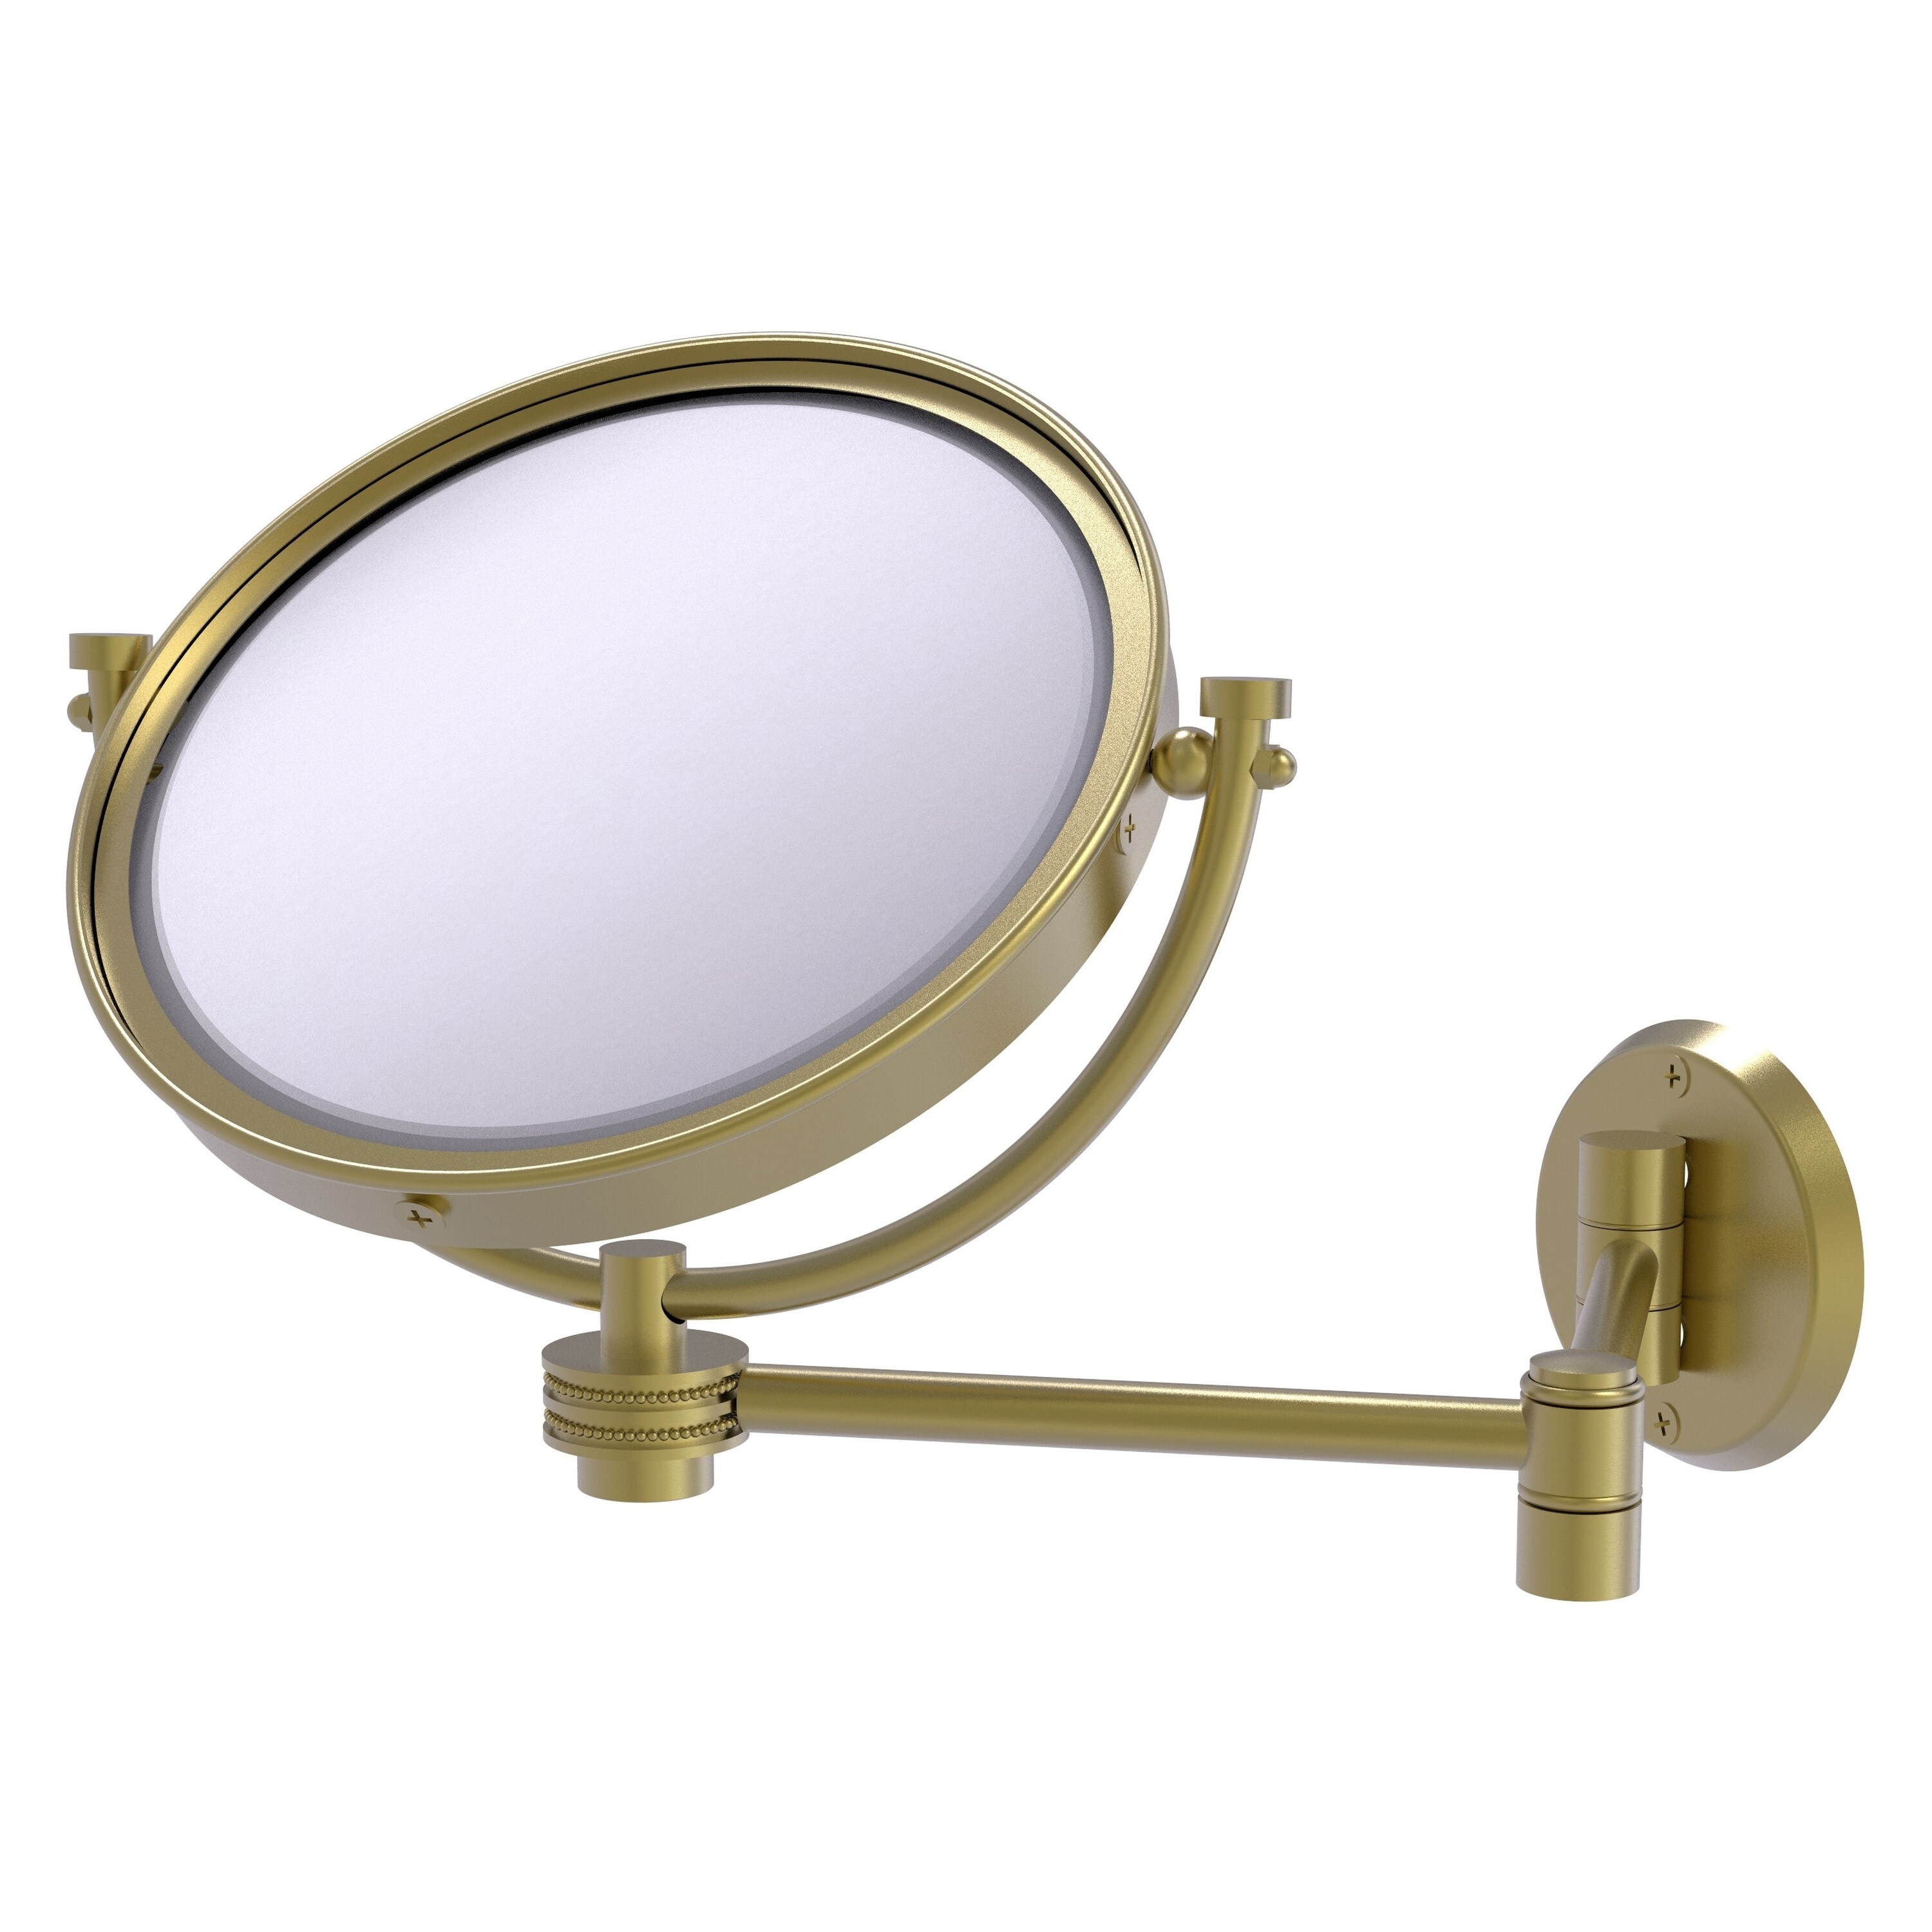 8-in x 10-in Satin Chrome Double-sided 5X Magnifying Wall-mounted Vanity Mirror | - Allied Brass WM-6D/5X-SBR